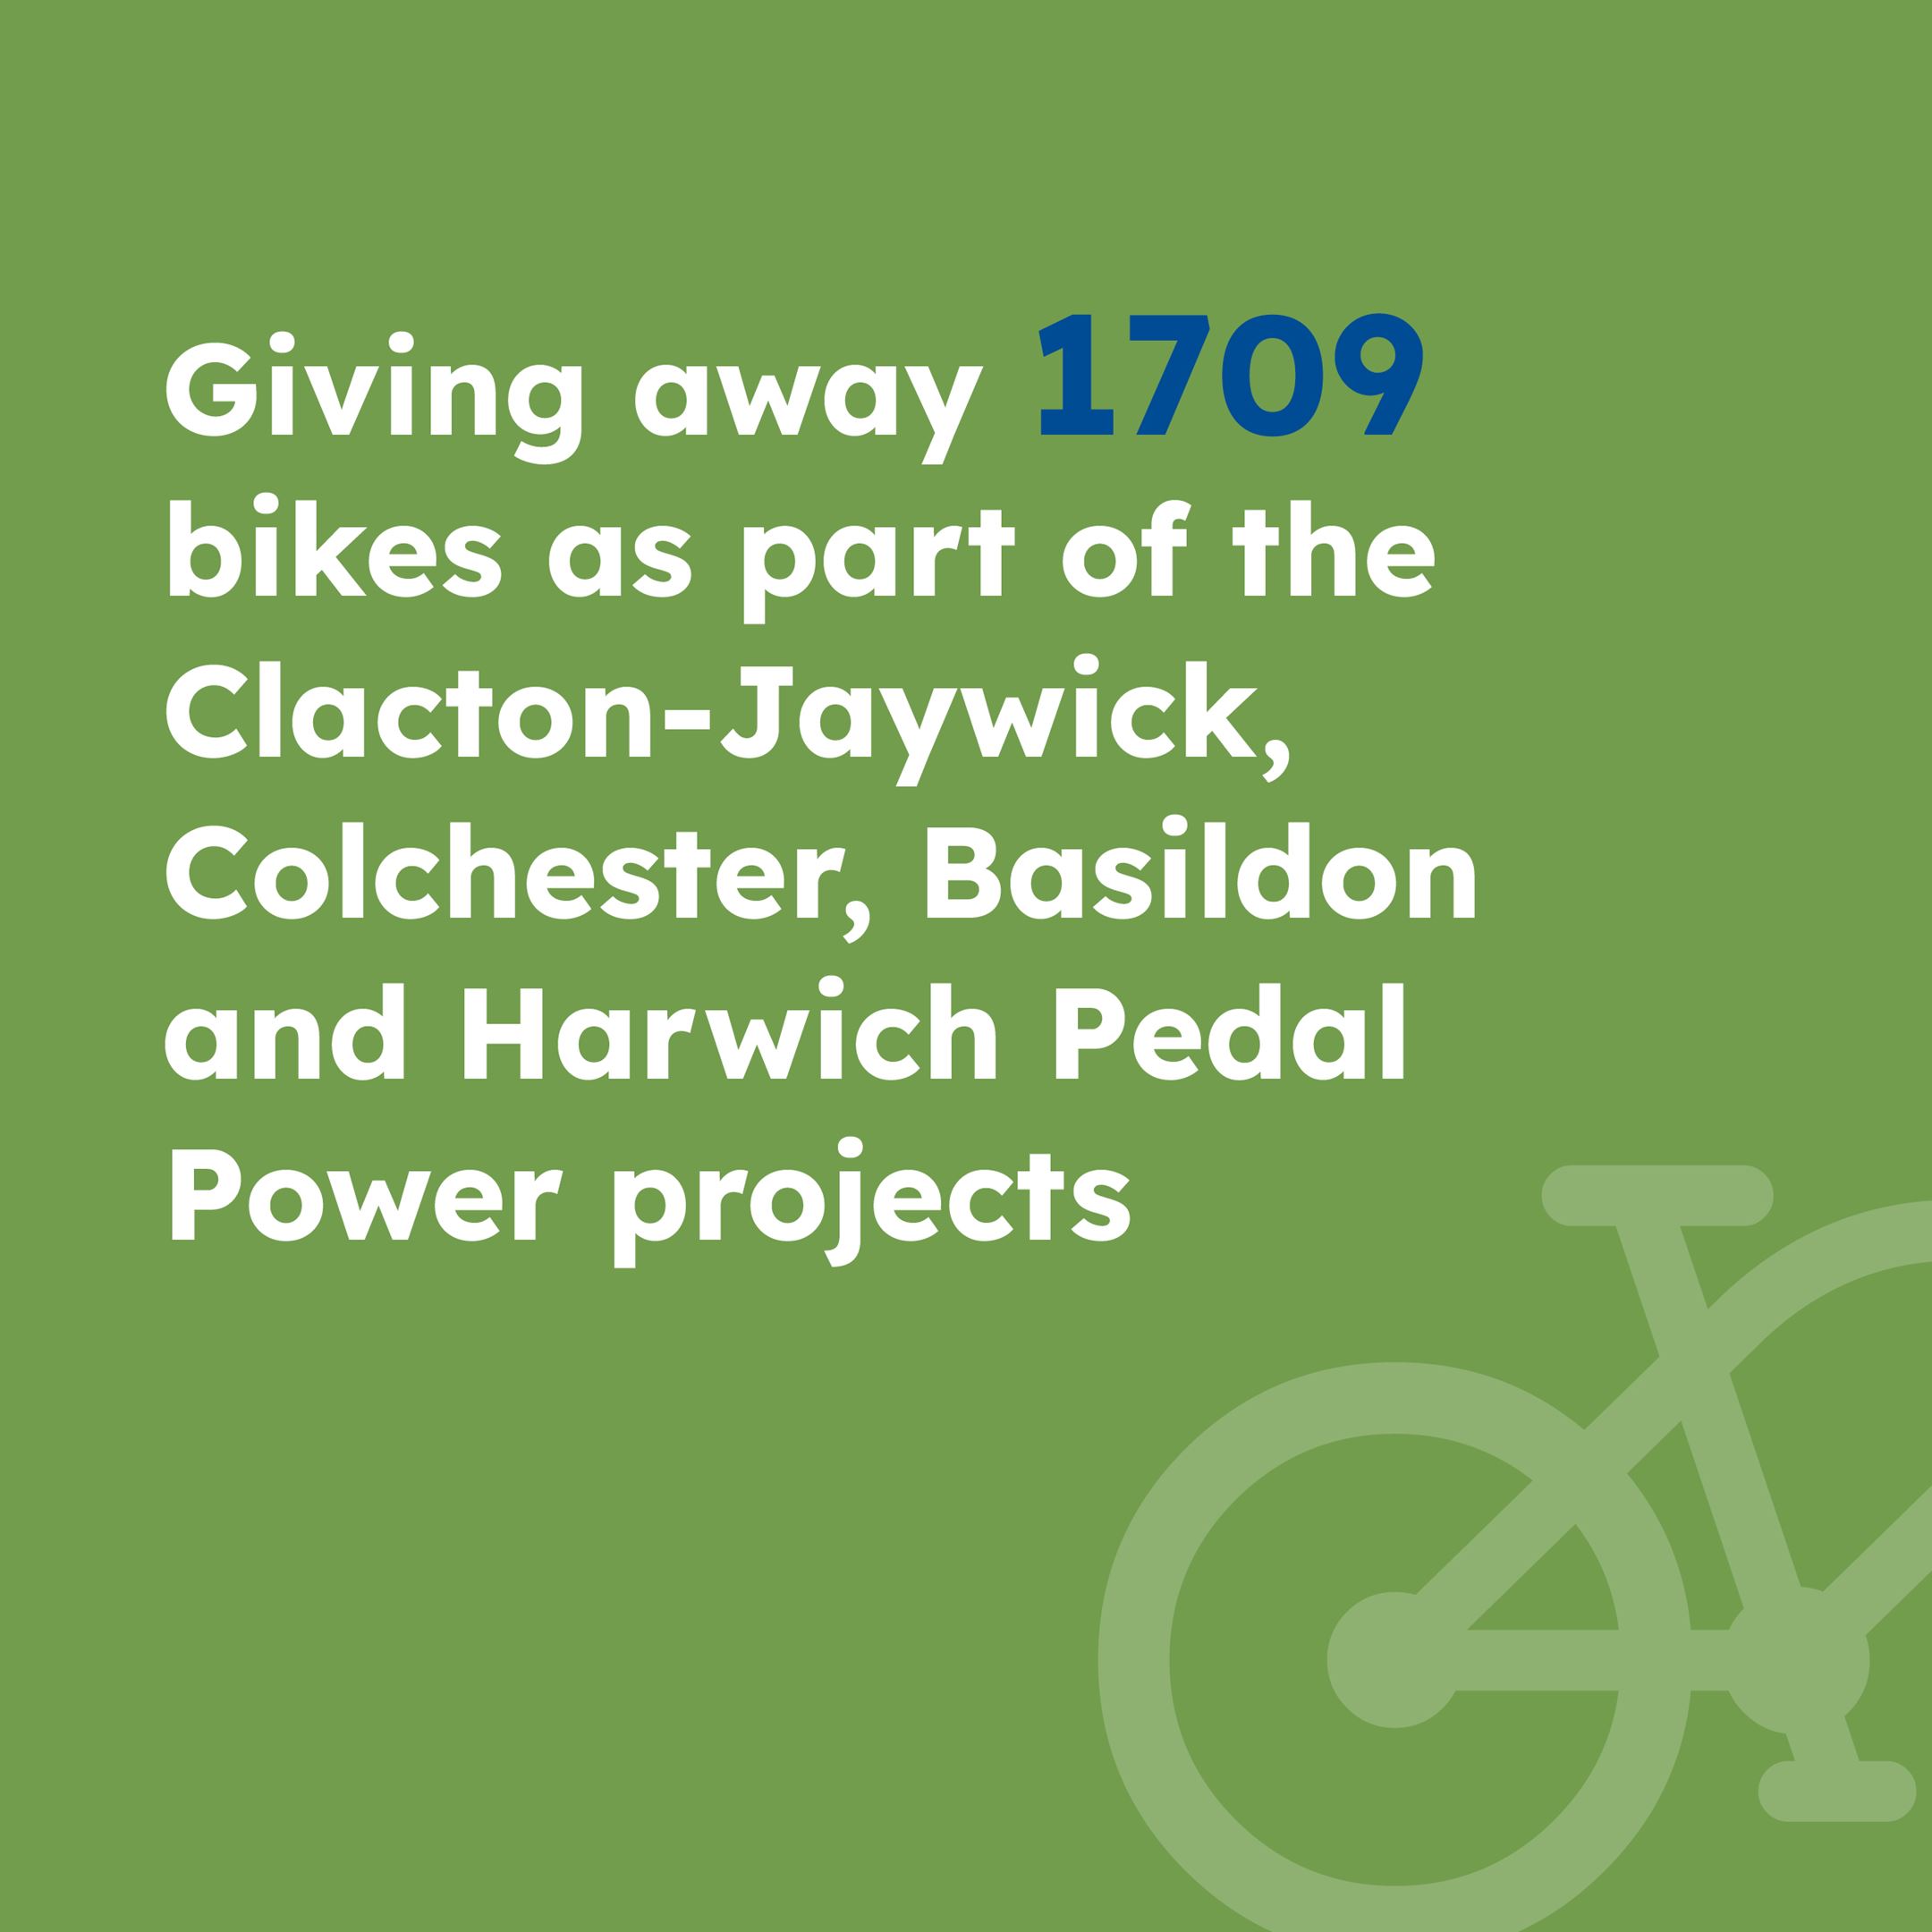 Giving away 1709 bikes as part of the Clacton-Jaywick, Colchester, Basildon and Harwich Pedal Power projects